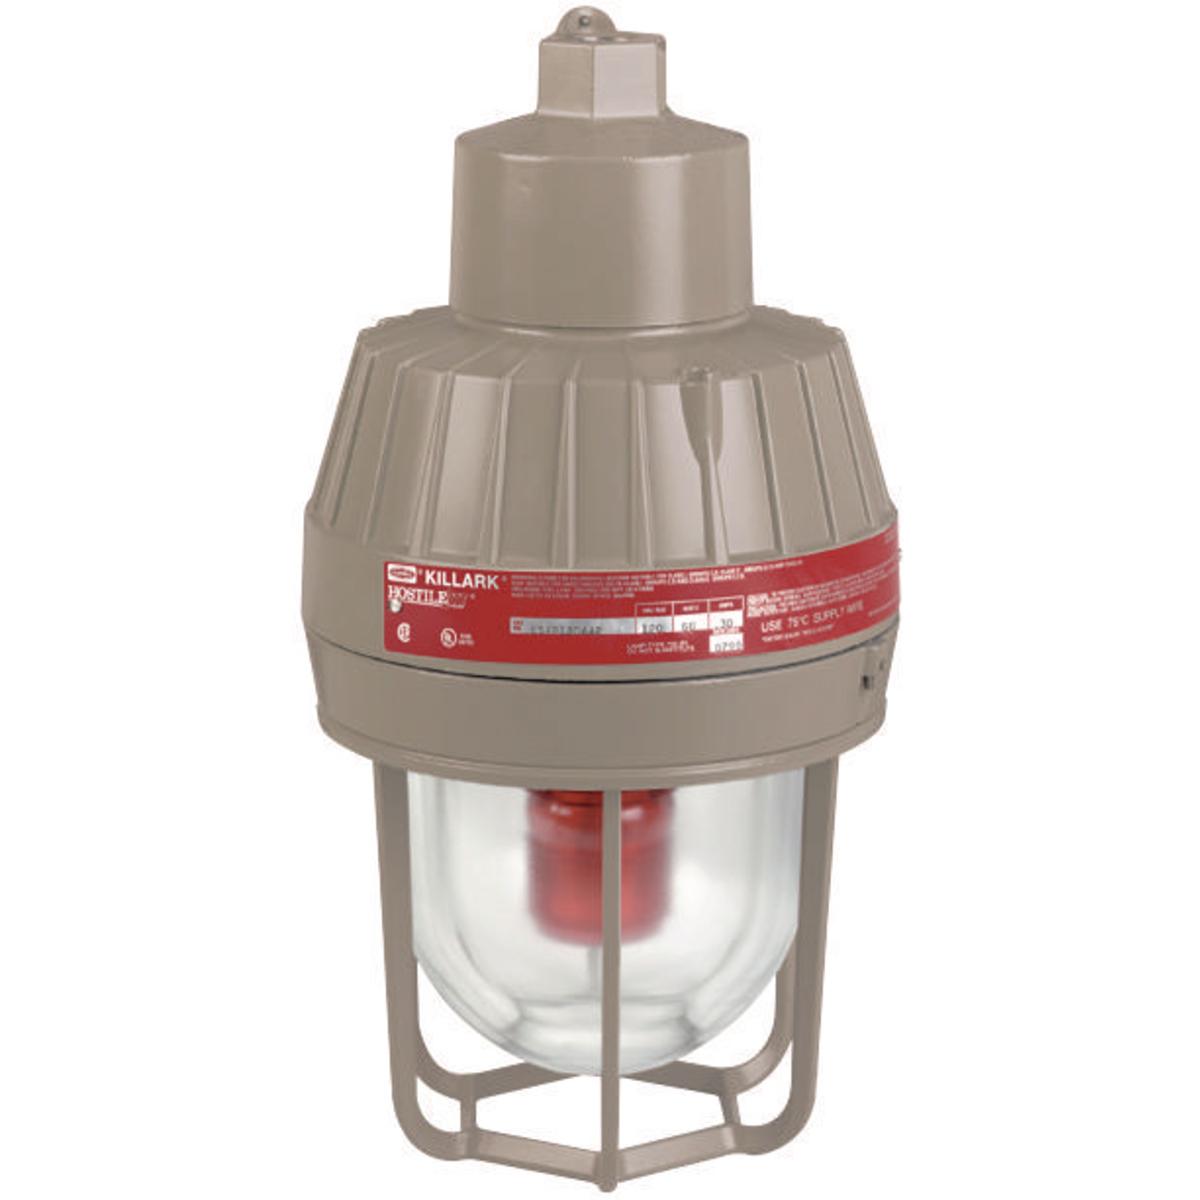 Hubbell ESXR1274A2 12-74V Red Strobe, 3/4" Pendant  ; Electronic component temperature range –40˚C to +55˚C ; NEC temperature code, T6 ( ; Flash rate–85 flashes per minute ; Xenon type lamp ; Voltage and amperage: 12-74 VDC: Draws 1.25A avg. @ 12 VDC tapering to 0.2A avg. @